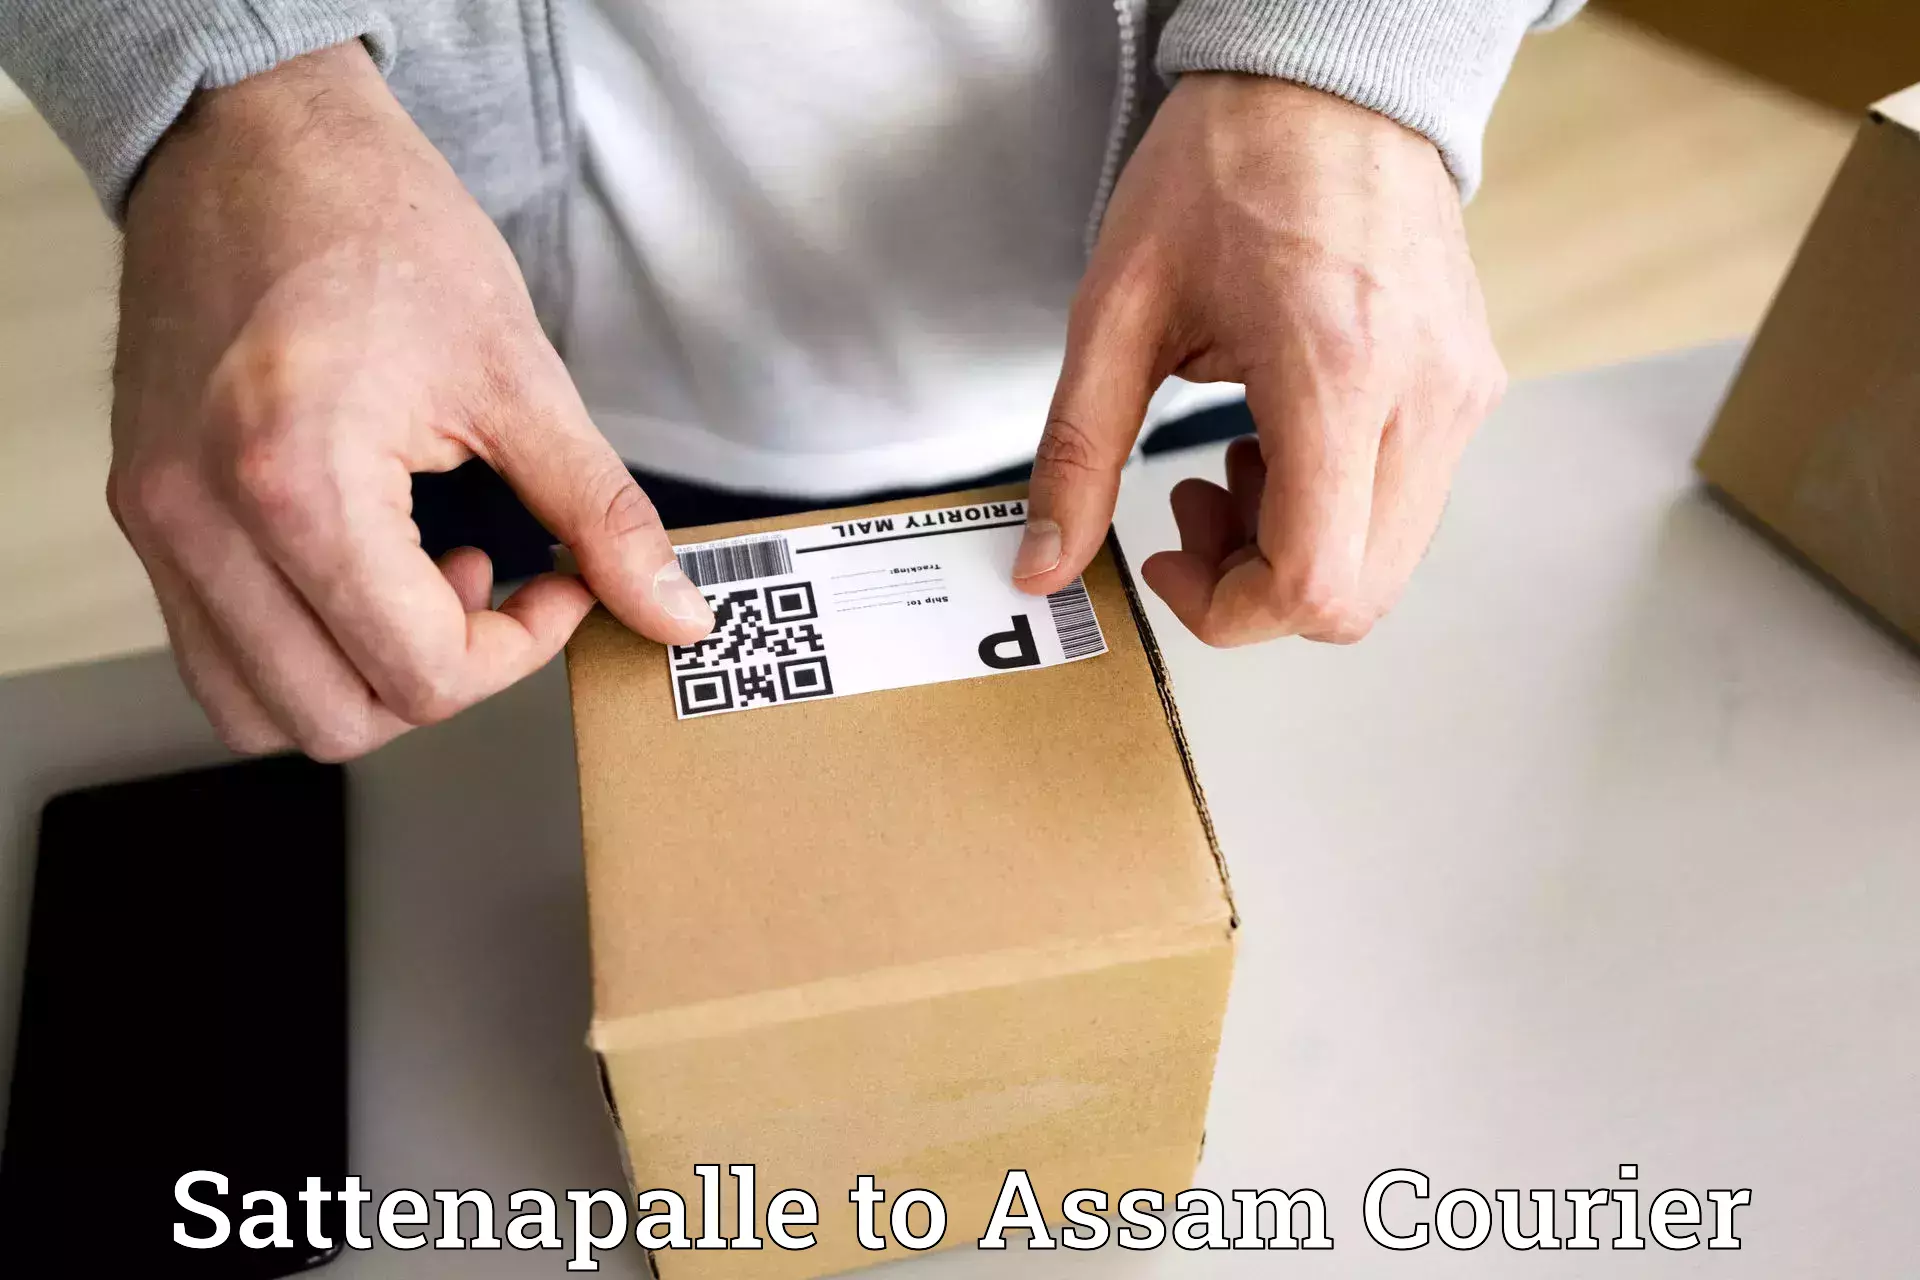 Affordable parcel service Sattenapalle to Baihata